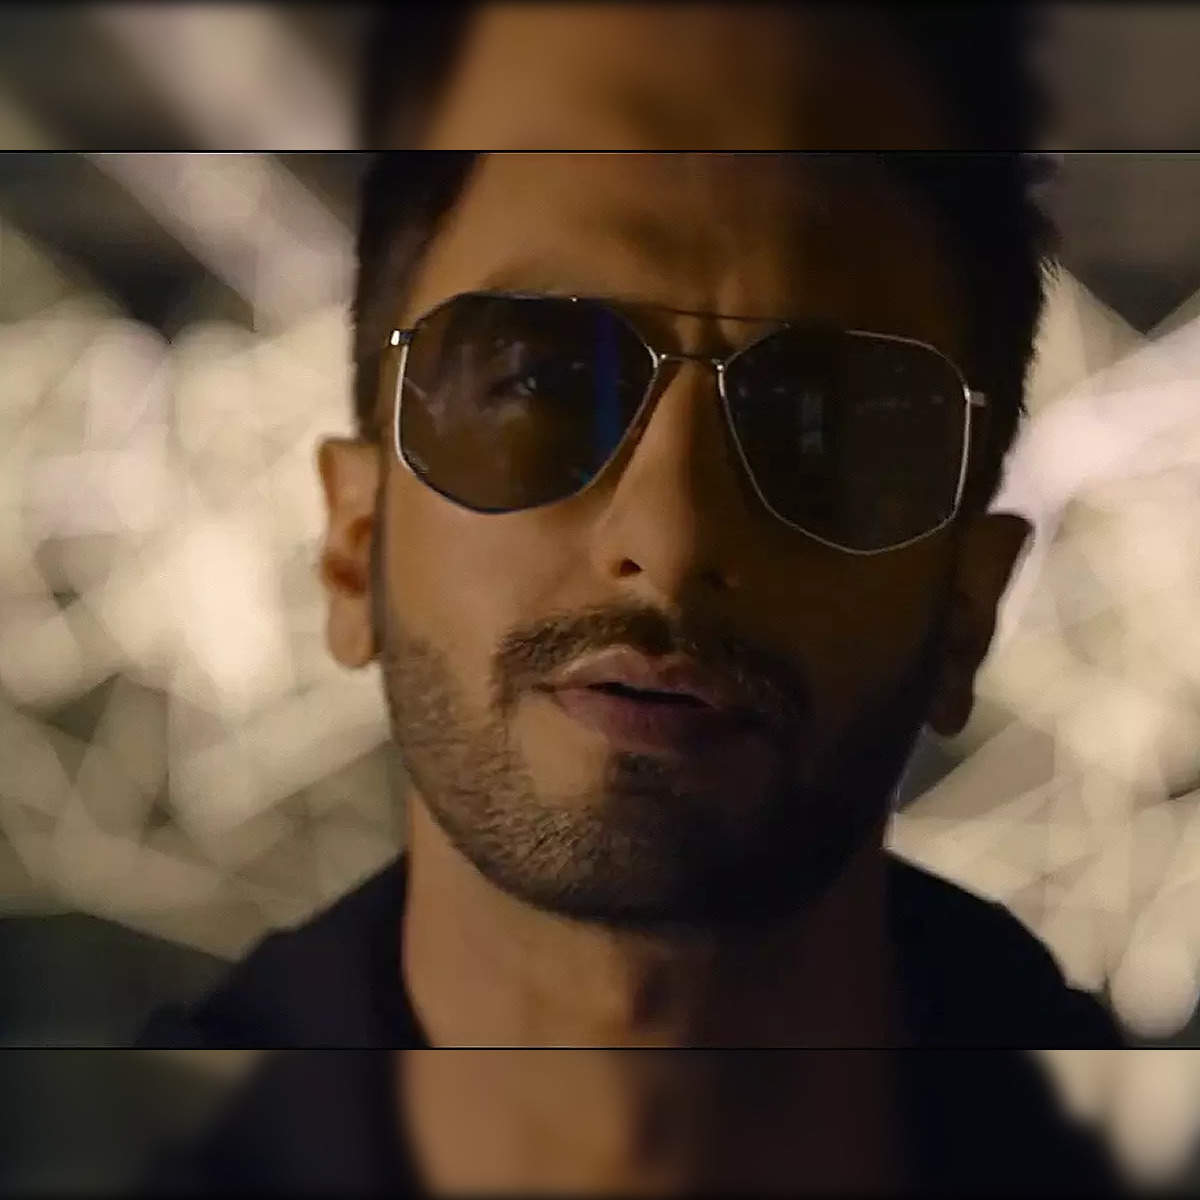 Ranveer Singh is the perfect combination of talent and stardom Bollywood